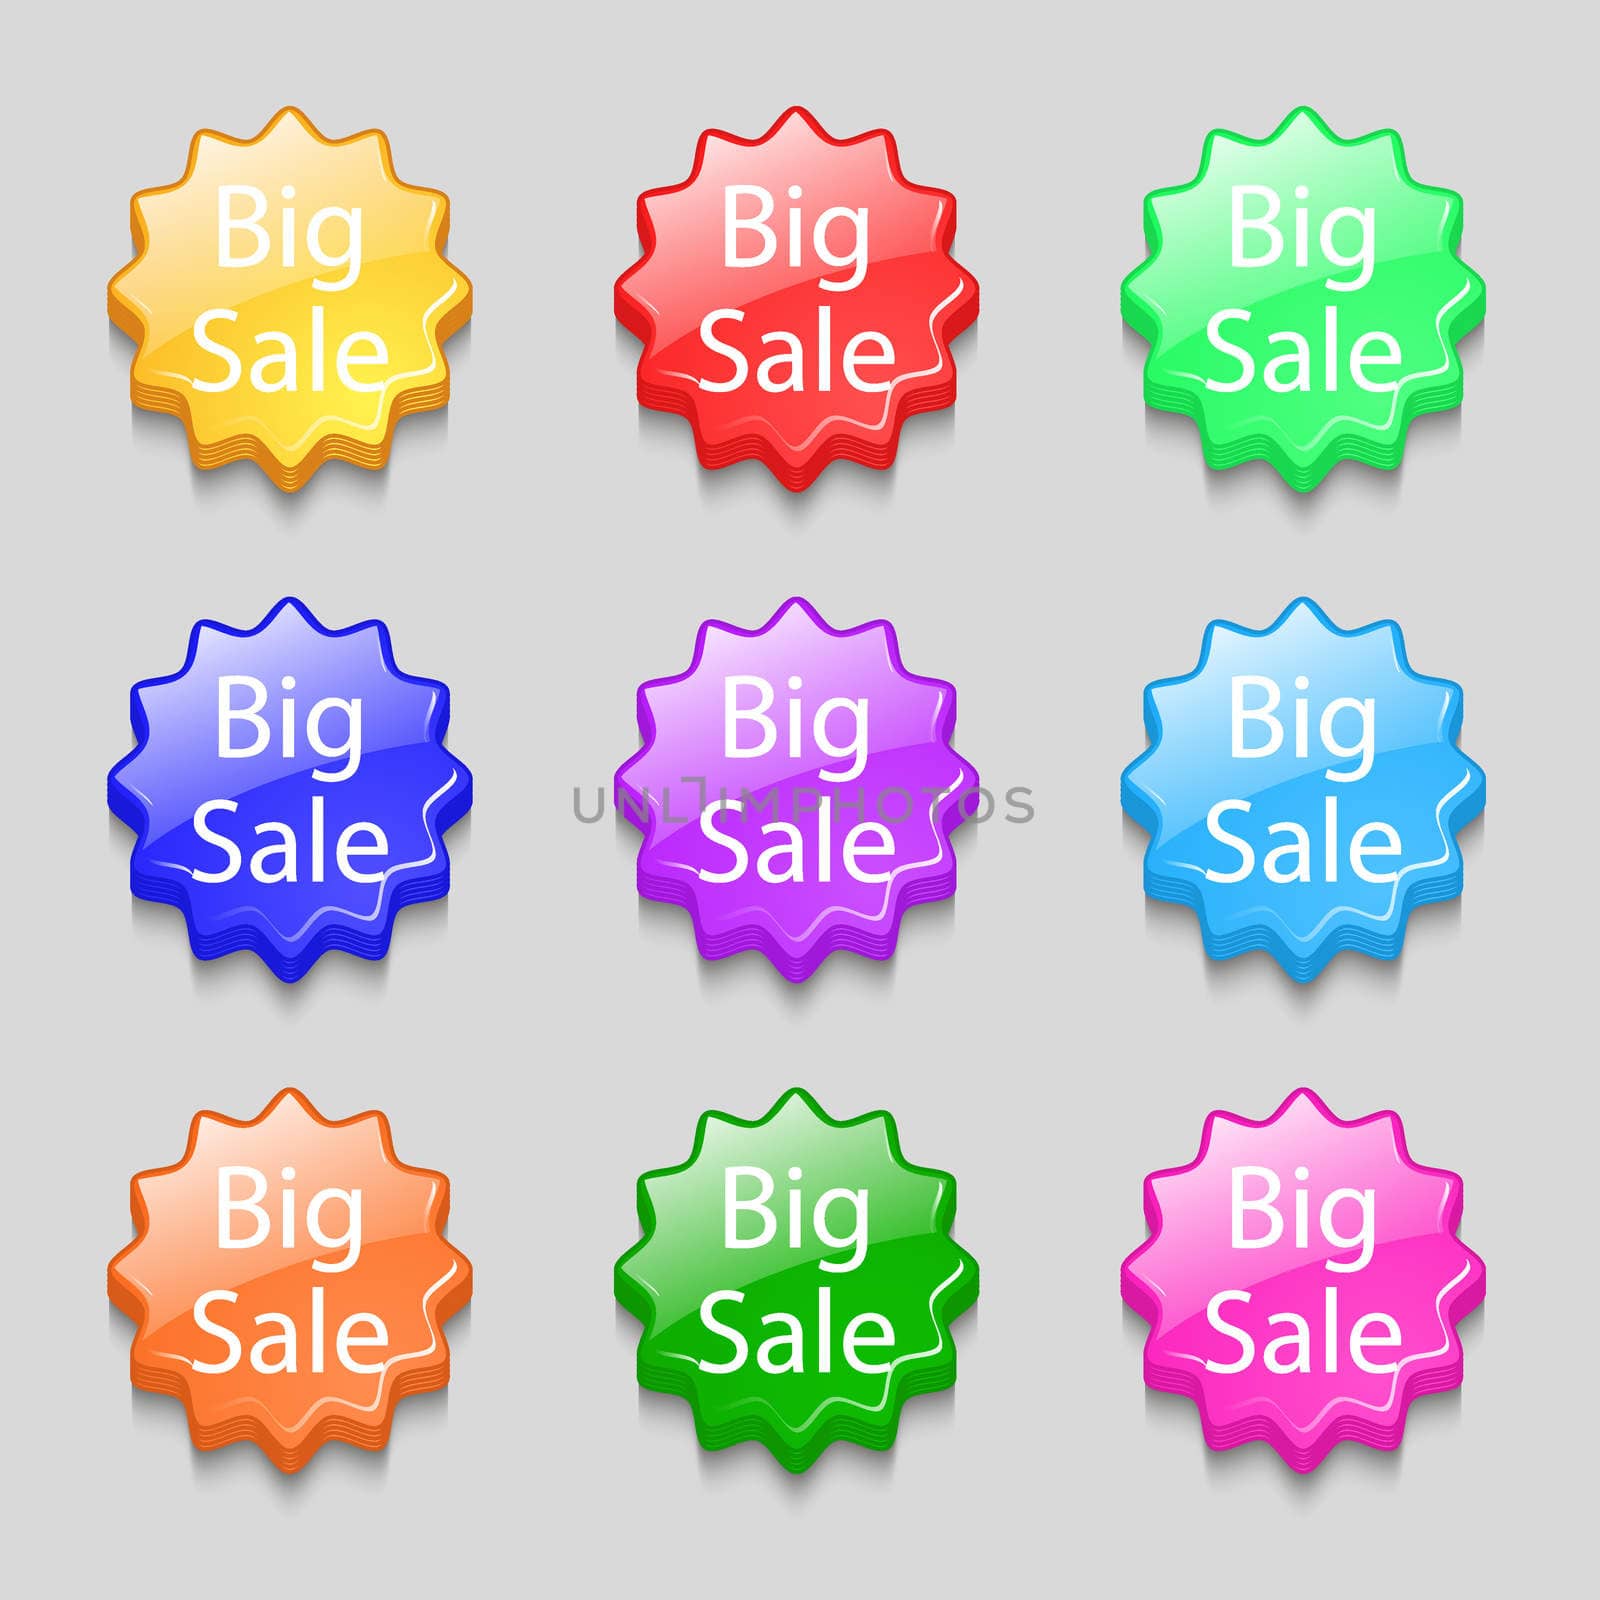 Big sale sign icon. Special offer symbol. Symbols on nine wavy colourful buttons. illustration